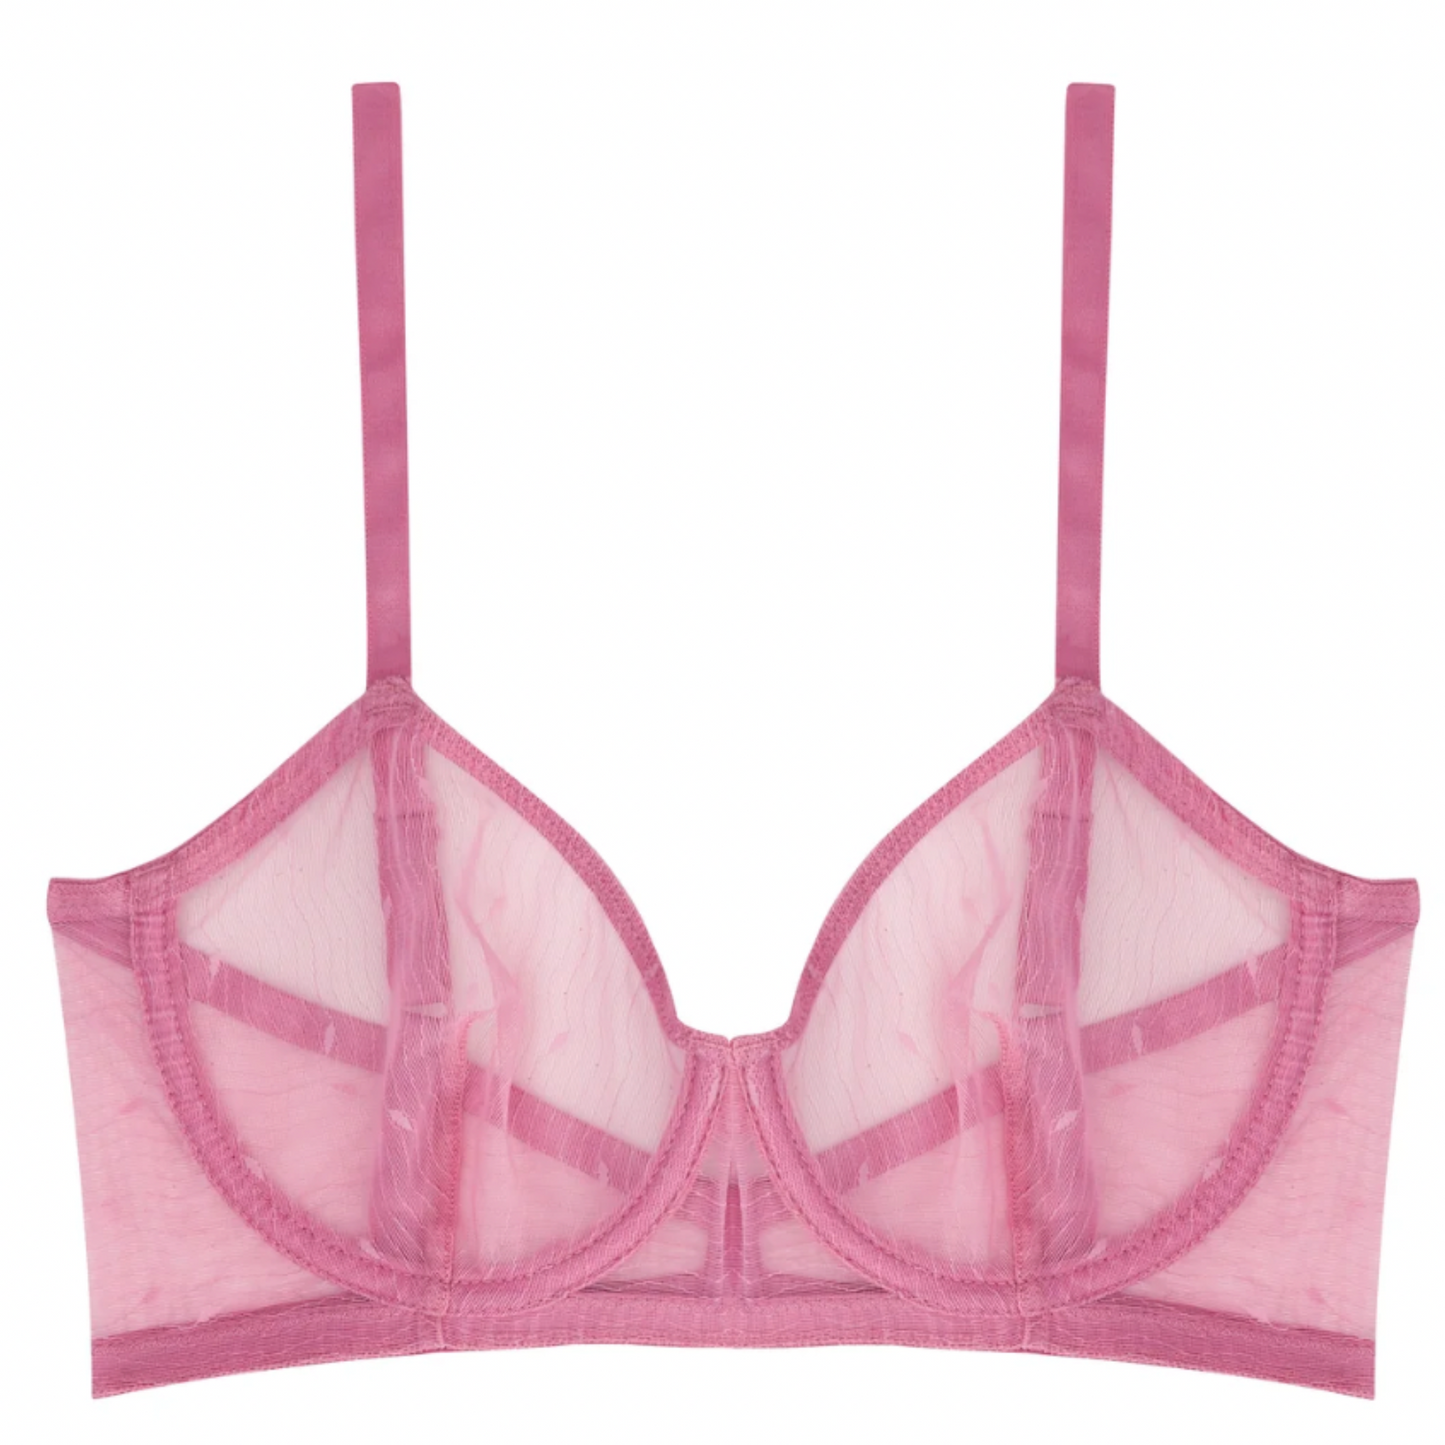 Is the underwired bra over?